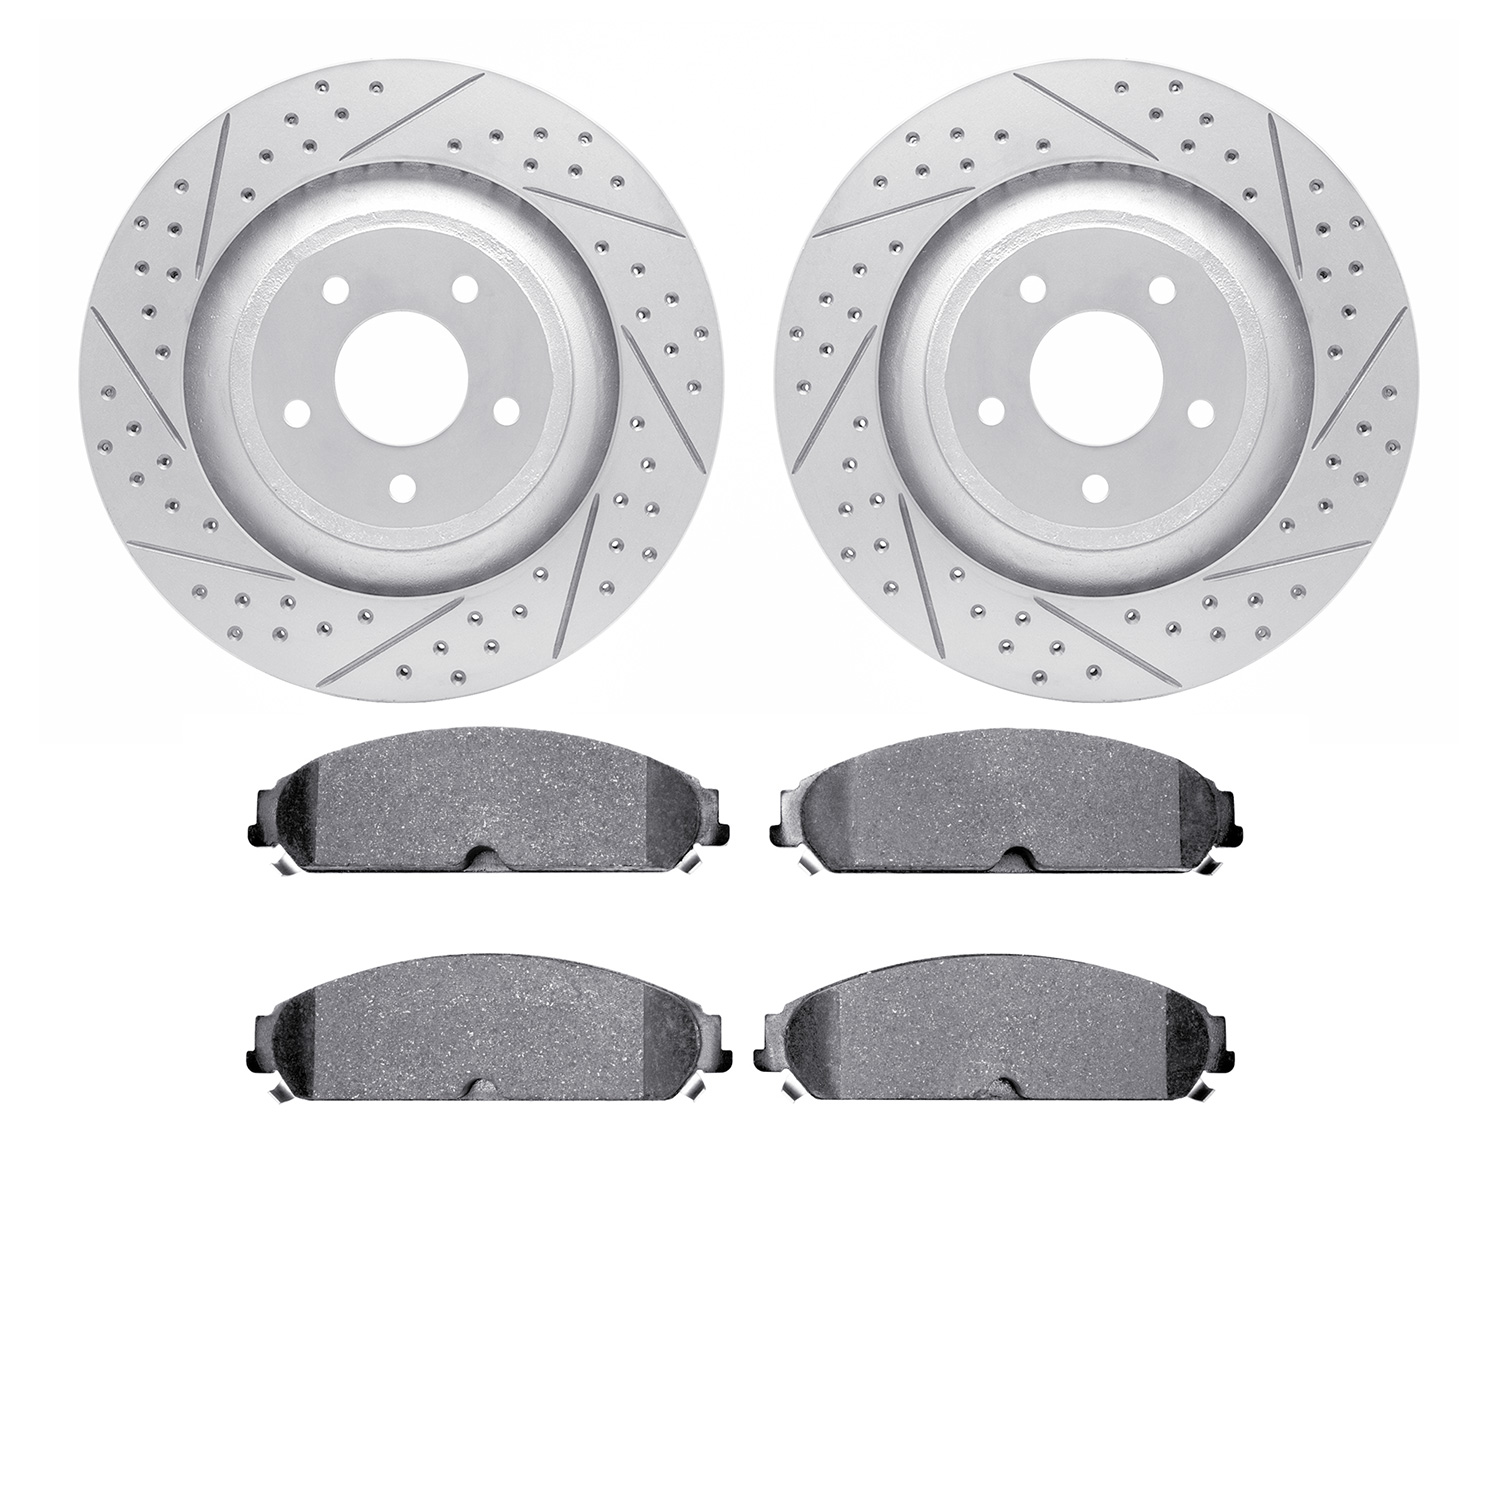 2202-40014 Geoperformance Drilled/Slotted Rotors w/Heavy-Duty Pads Kit, 2008-2014 Mopar, Position: Front